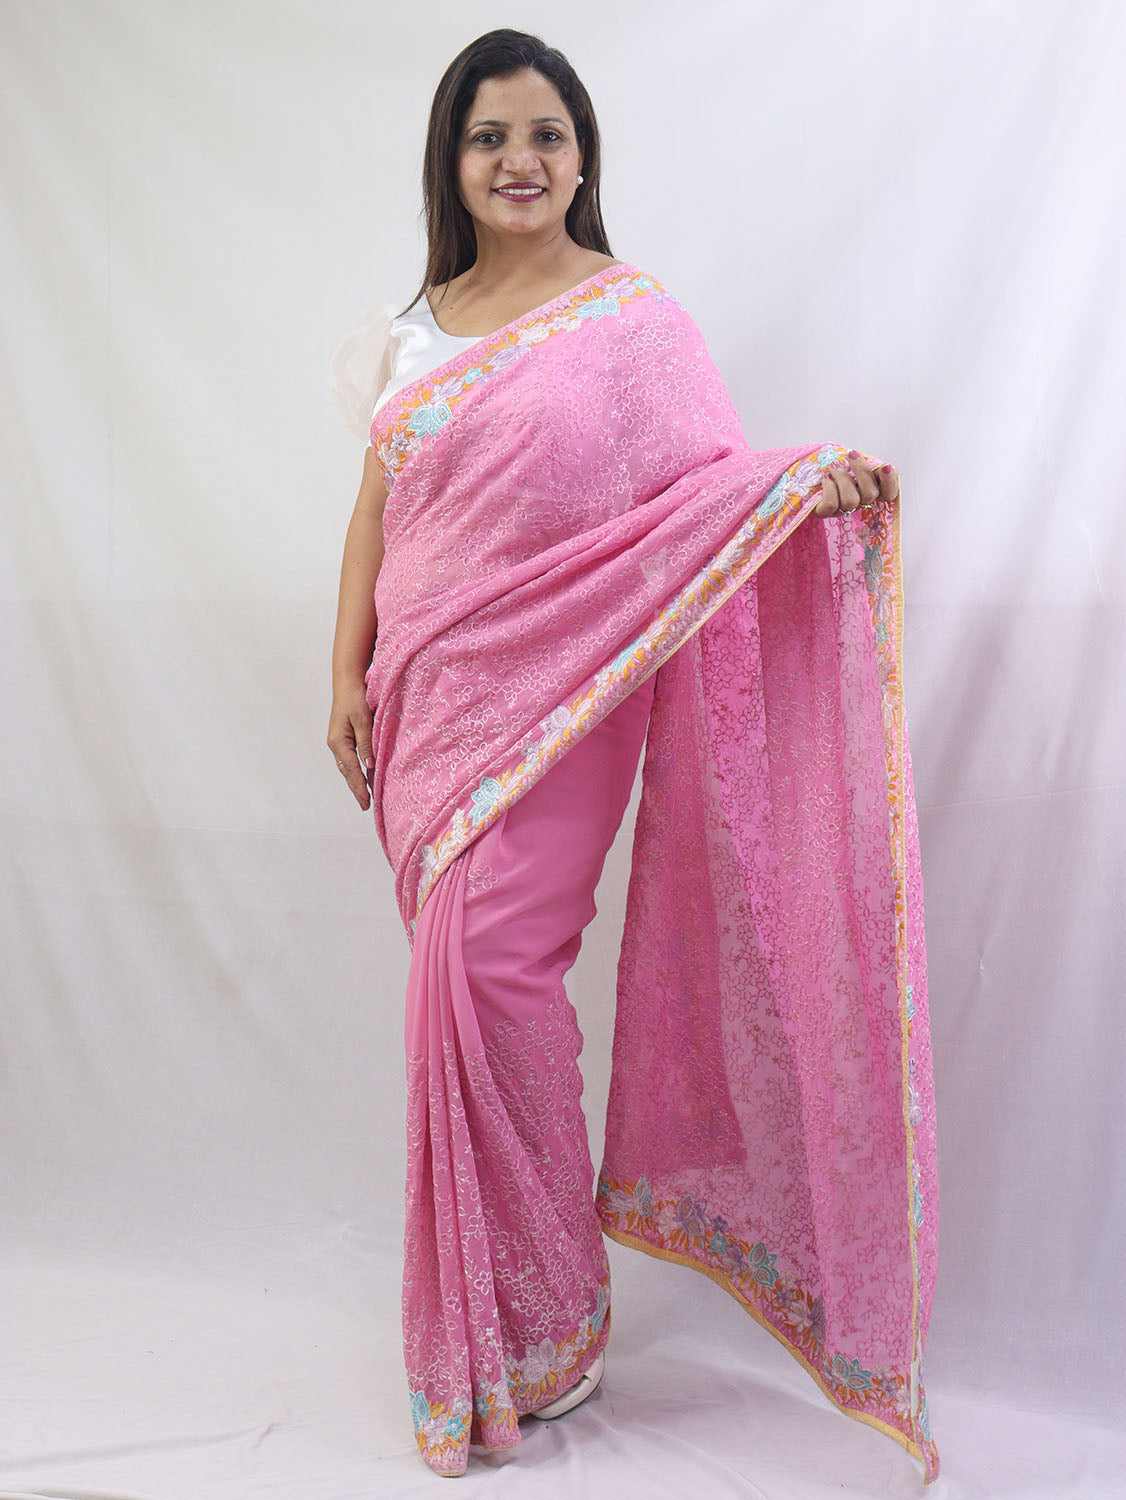 Stunning Pink Georgette Saree with Intricate Thread Work Embroidery